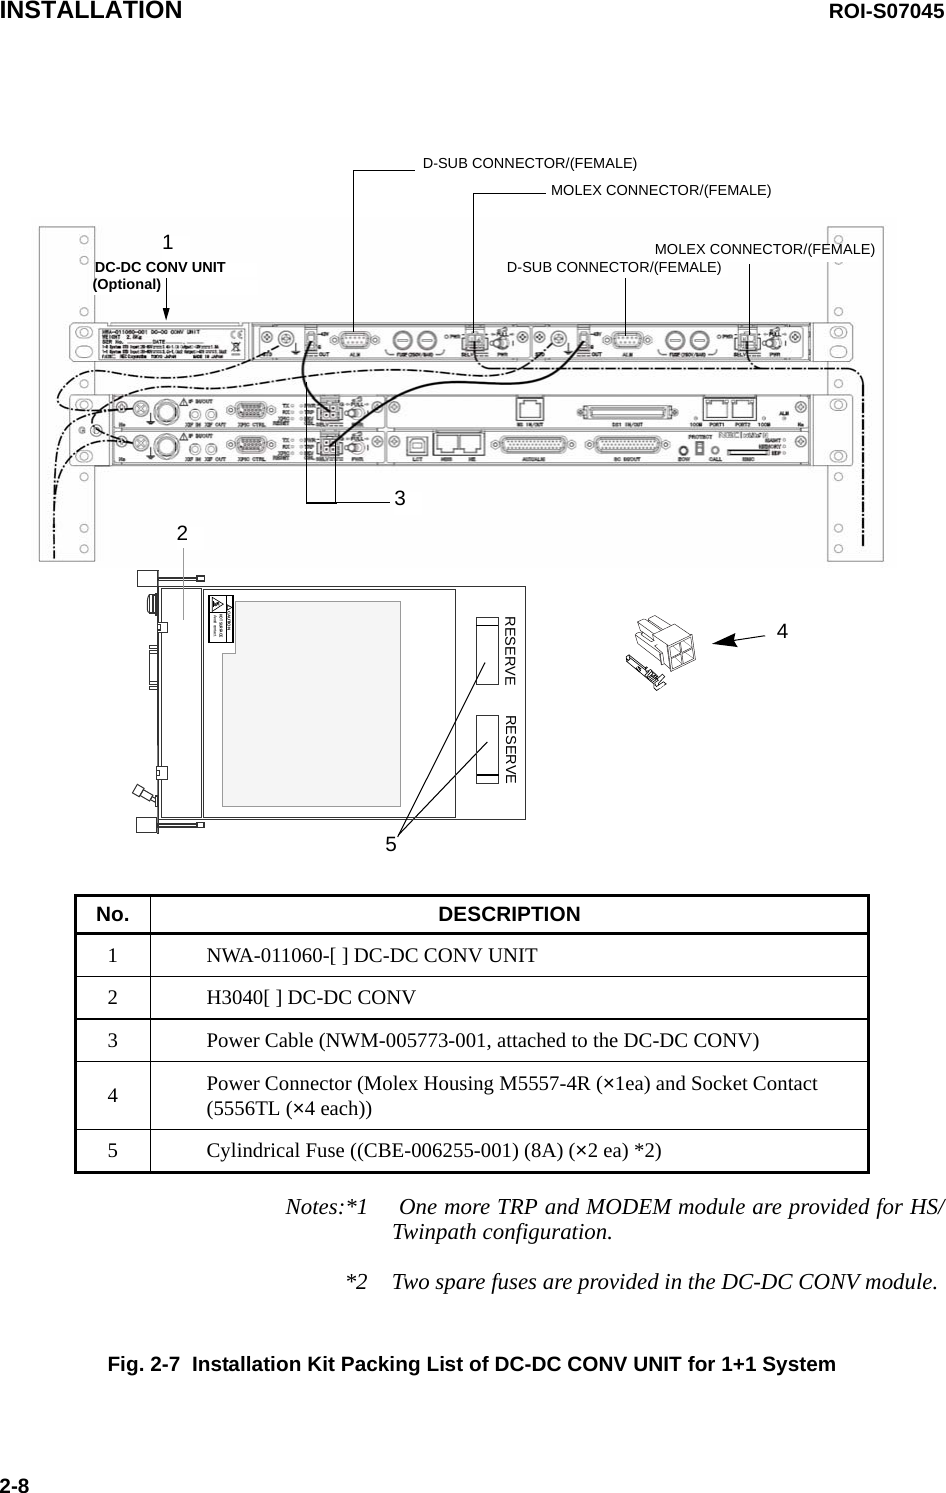 INSTALLATION ROI-S070452-8Notes:*1  One more TRP and MODEM module are provided for HS/Twinpath configuration.*2 Two spare fuses are provided in the DC-DC CONV module.Fig. 2-7  Installation Kit Packing List of DC-DC CONV UNIT for 1+1 SystemMOLEX CONNECTOR/(FEMALE)MOLEX CONNECTOR/(FEMALE)D-SUB CONNECTOR/(FEMALE)D-SUB CONNECTOR/(FEMALE)DC-DC CONV UNIT(Optional)4513RESERVE RESERVECAUTIONHOT SURFACEAvoid contact.!2No. DESCRIPTION1 NWA-011060-[ ] DC-DC CONV UNIT2 H3040[ ] DC-DC CONV3 Power Cable (NWM-005773-001, attached to the DC-DC CONV)4Power Connector (Molex Housing M5557-4R (×1ea) and Socket Contact (5556TL (×4 each))5 Cylindrical Fuse ((CBE-006255-001) (8A) (×2 ea) *2)